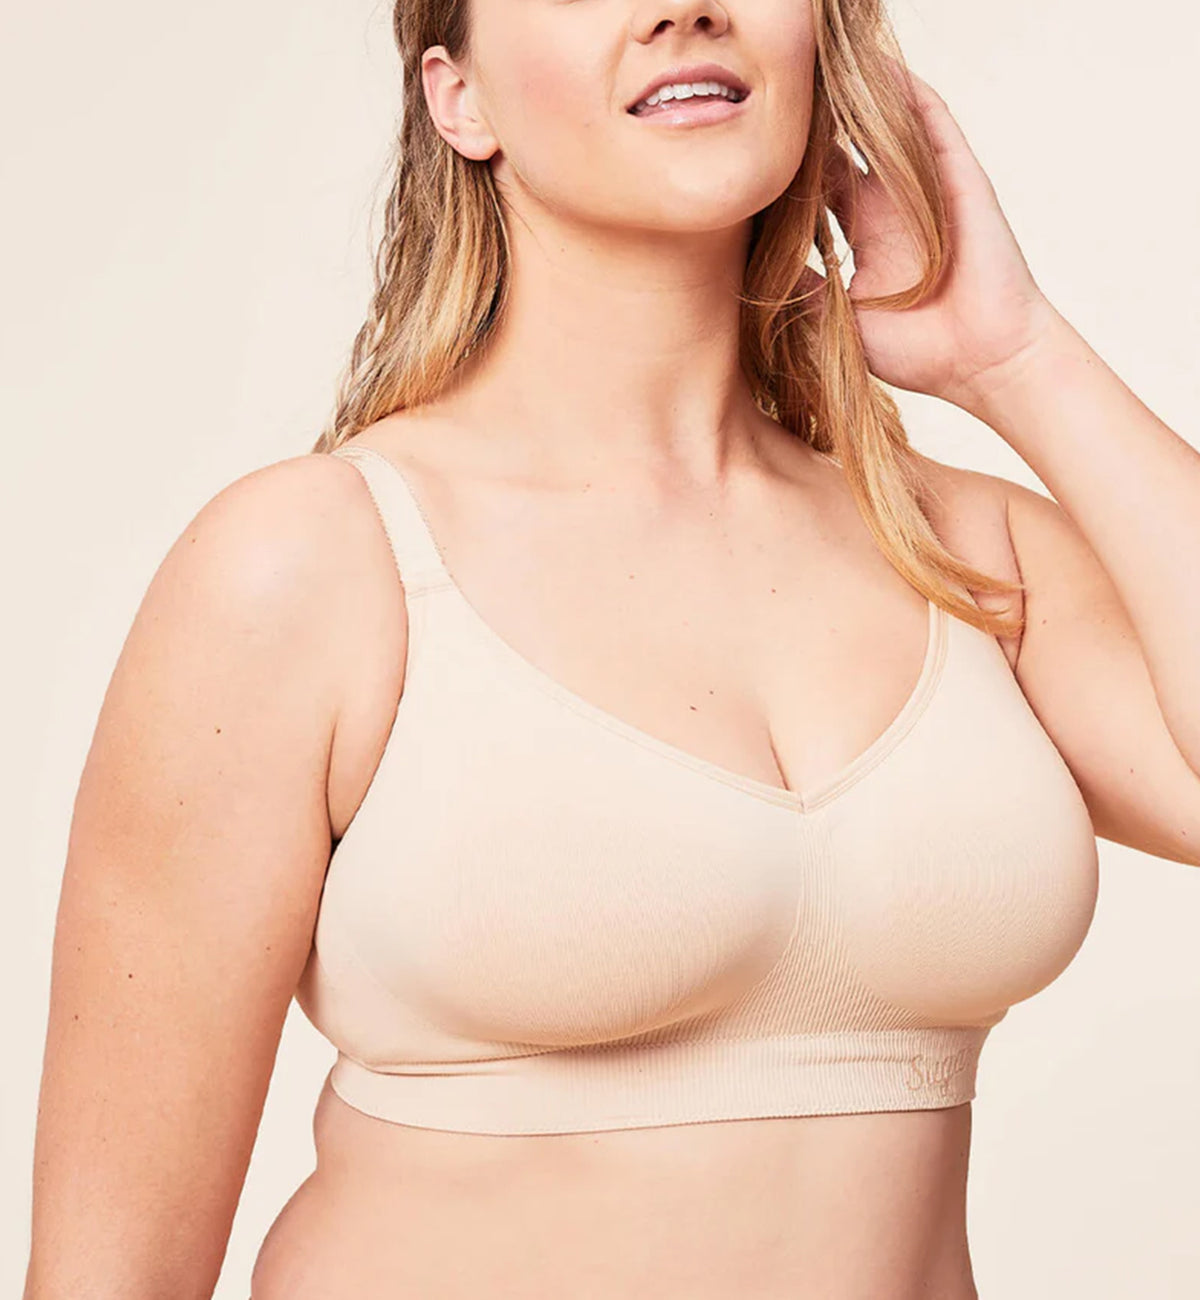 Sugar Candy by Cake Seamless Basic Everyday Softcup Bra (28-8005),XS,Nude - Nude,XS